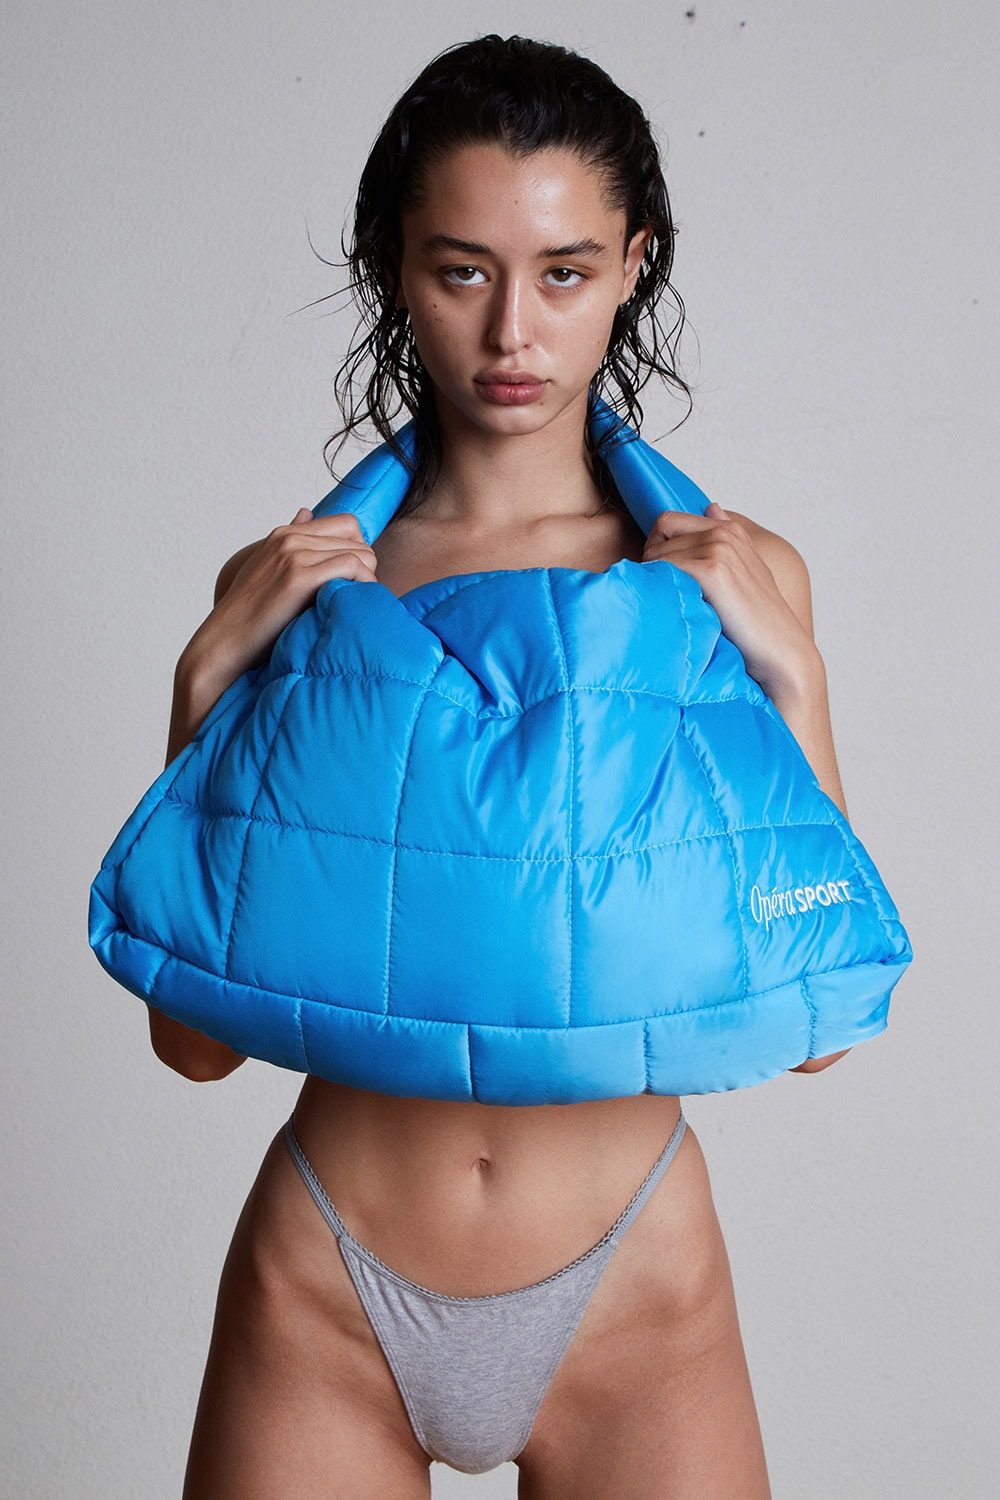 OpéraSPORT and Veneda Carter Collaboration Collection Bags Clothing Swimwear